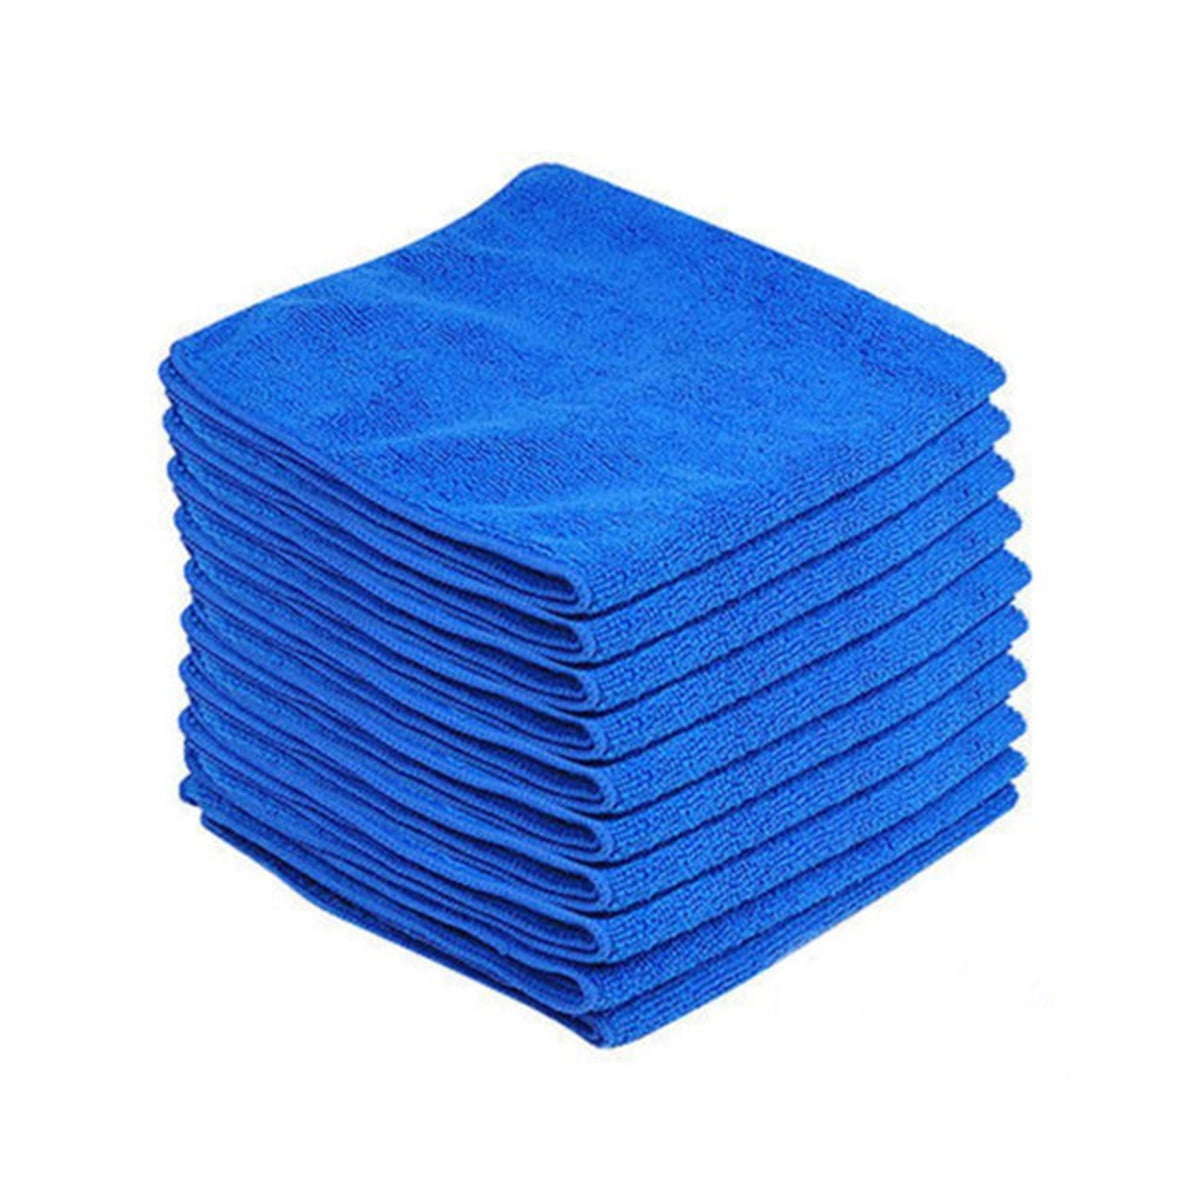 5/10Pcs Microfiber Wash Cleaning Towels Home Windows Car Clean Duster Cloths Hot 